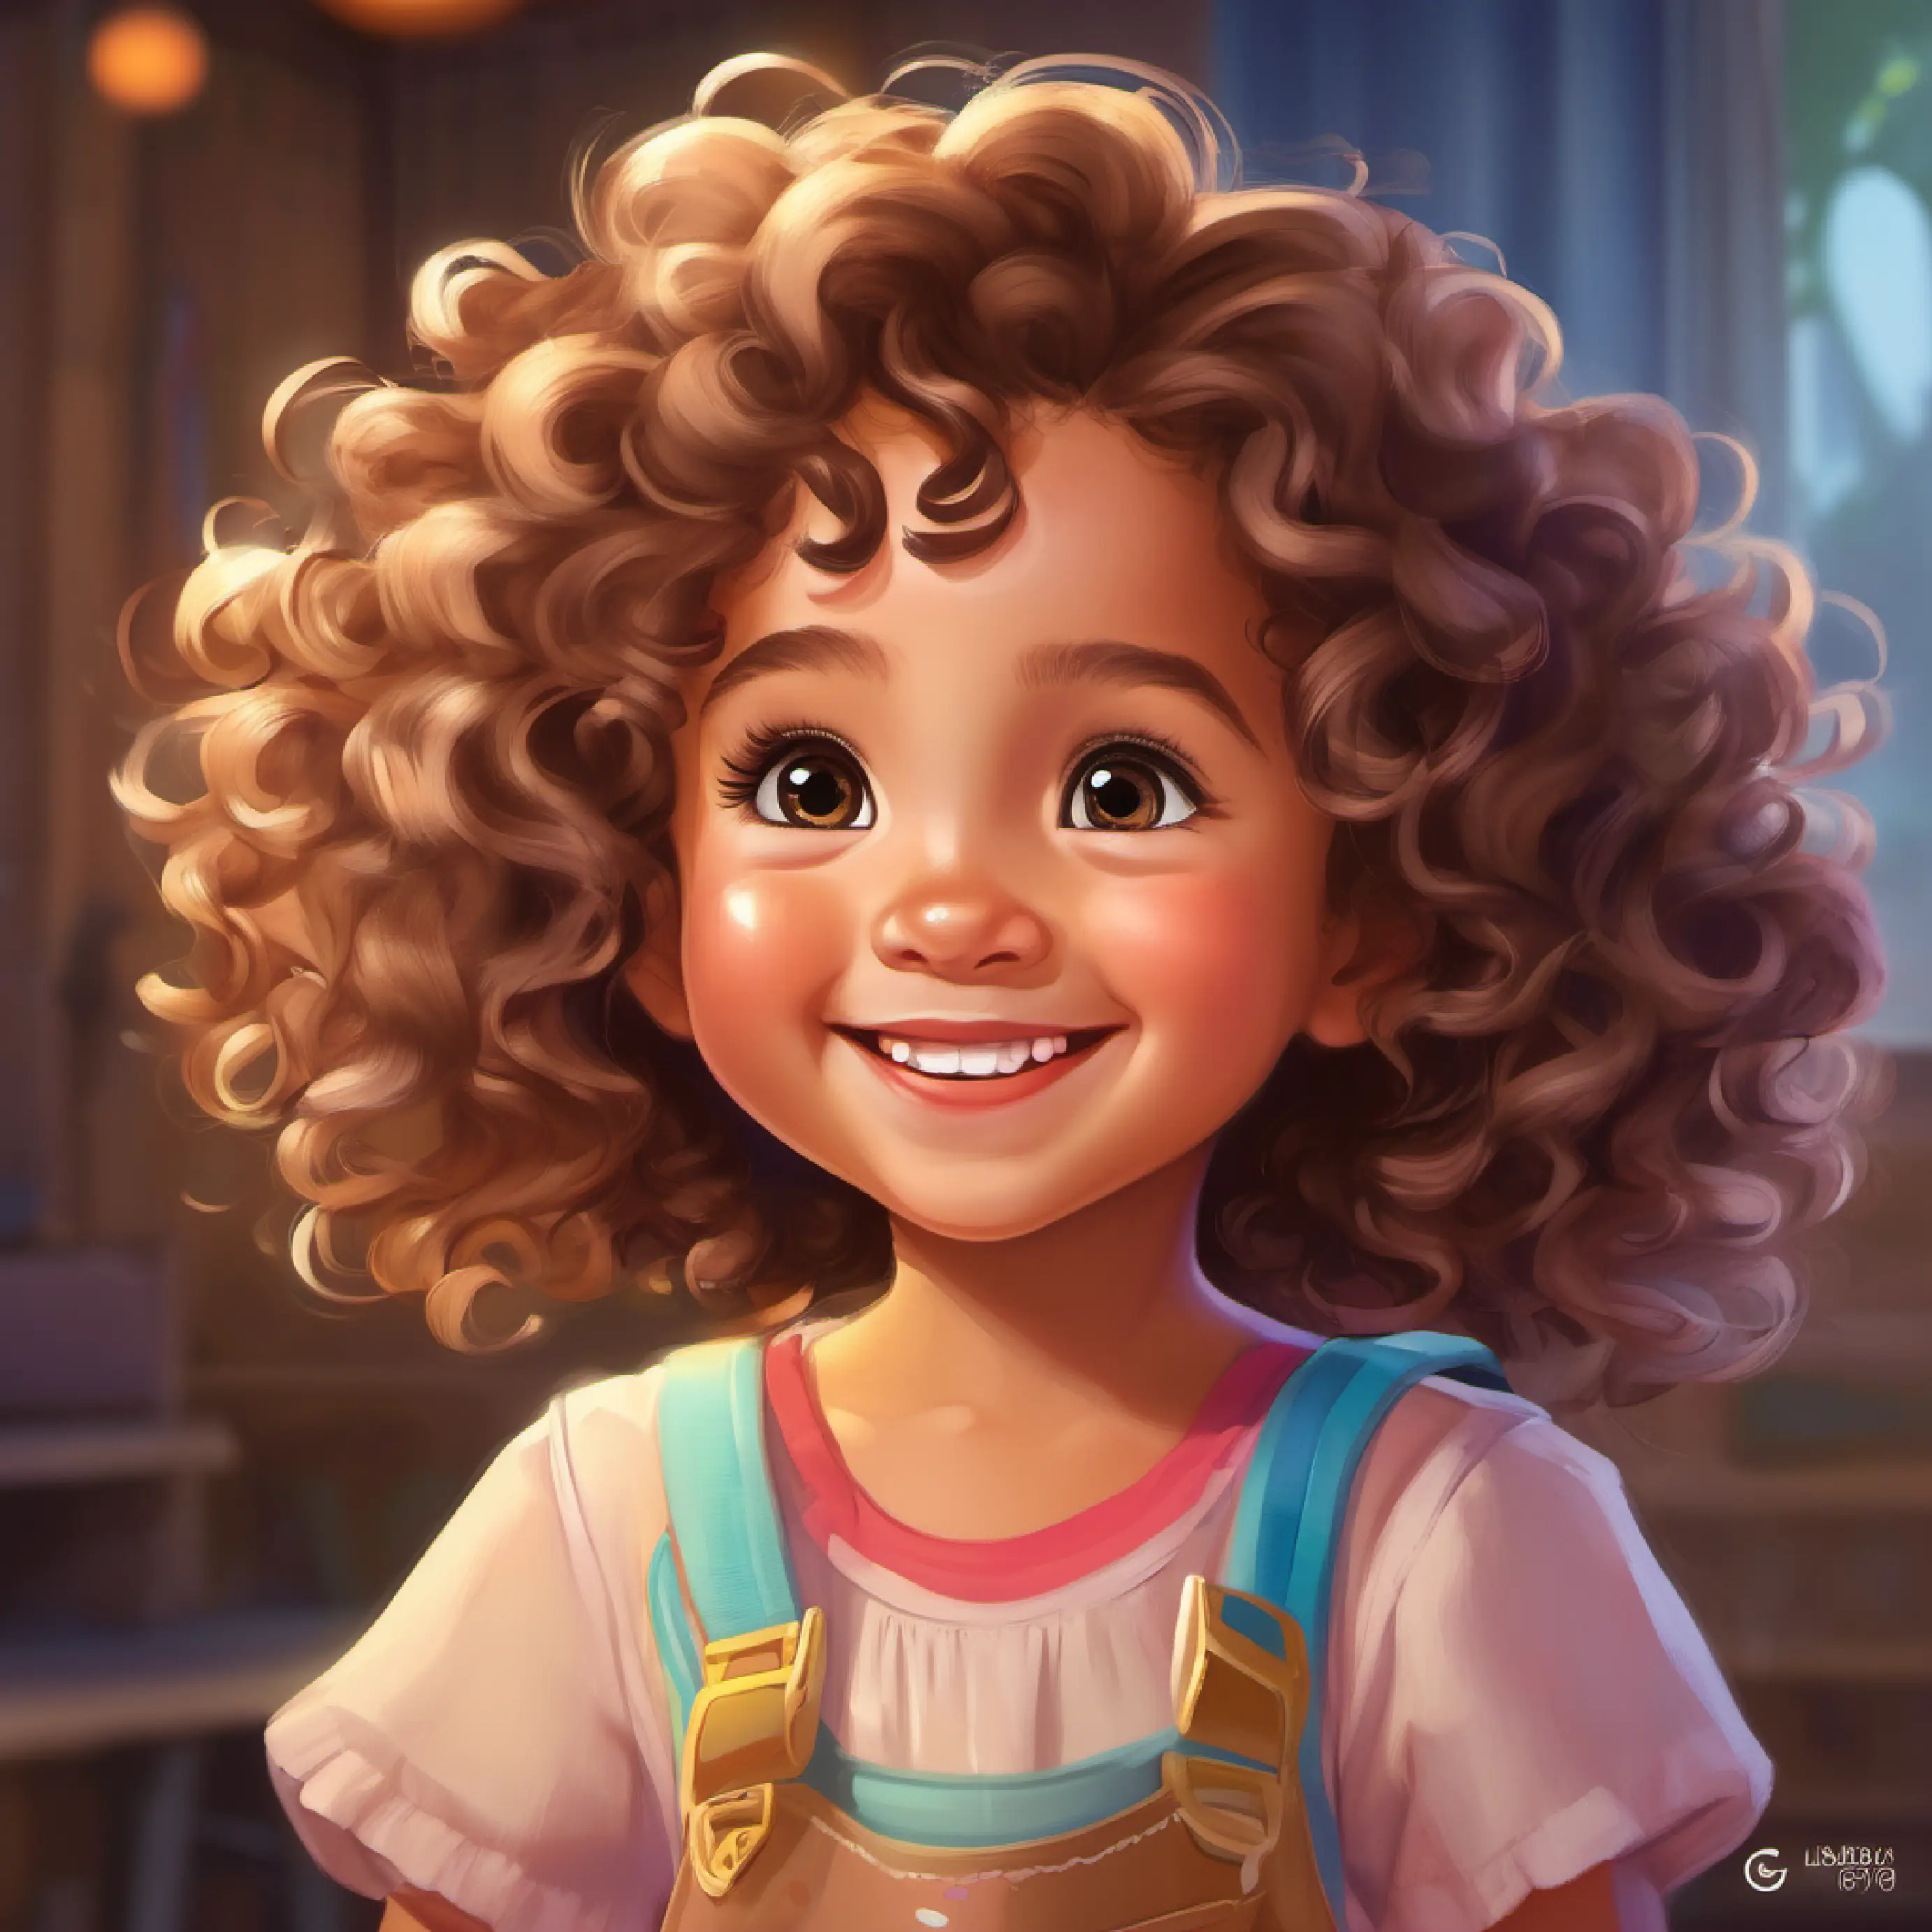 Valeria is laughing, showing her curly hair and bright eyes.